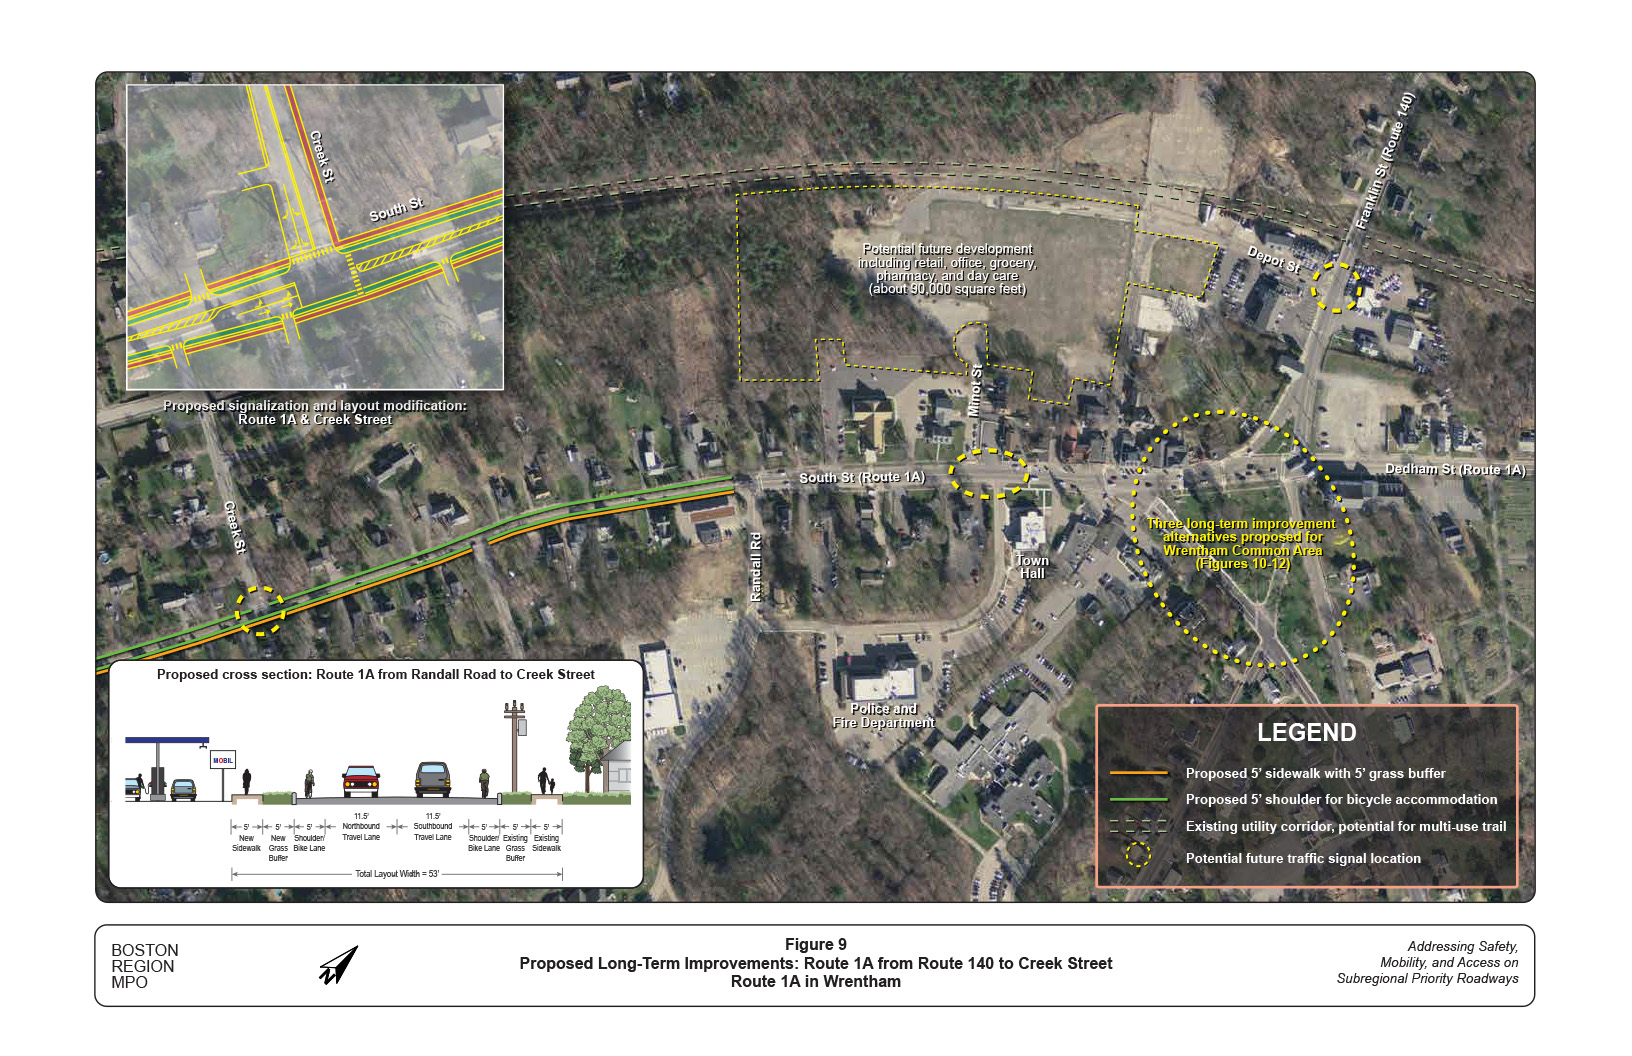 Figure 9 is a map that illustrates the proposed long-term improvements to sections of Route 1A between Route 140 and Creek Street. An inset contains an illustration of the proposed roadway cross section.